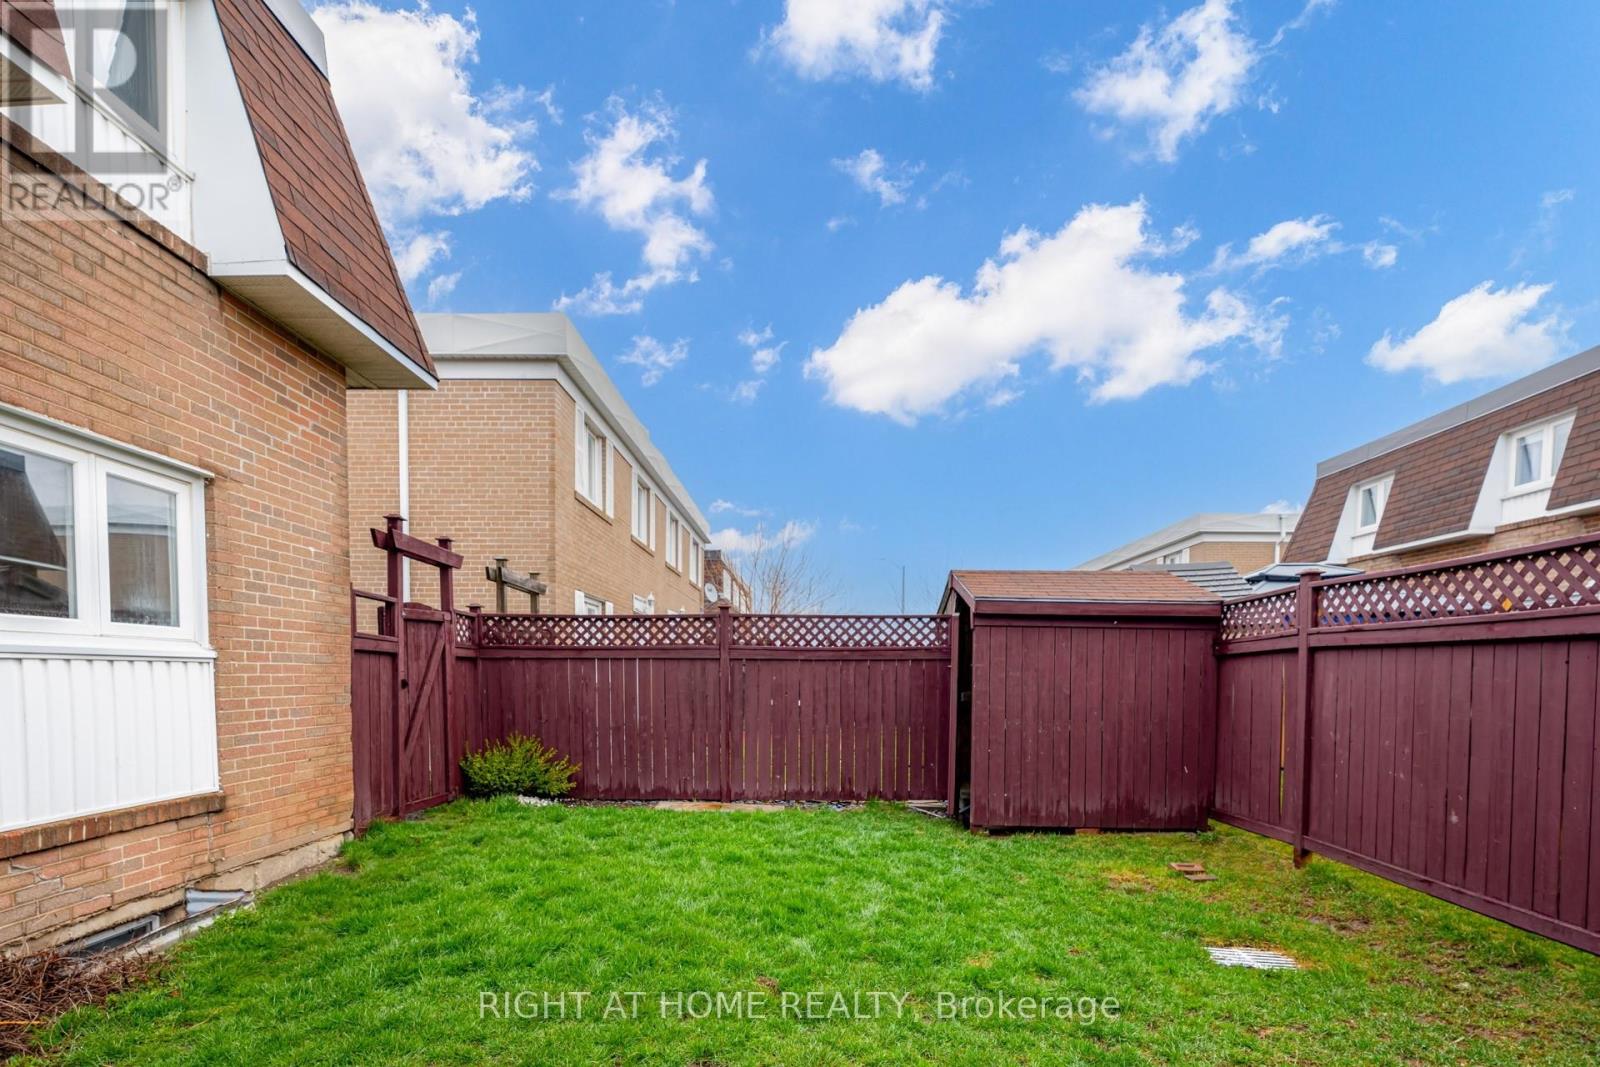 204 Townhouse Crescent, Brampton, 3 Bedrooms Bedrooms, ,2 BathroomsBathrooms,Single Family,For Sale,Townhouse,W8209194